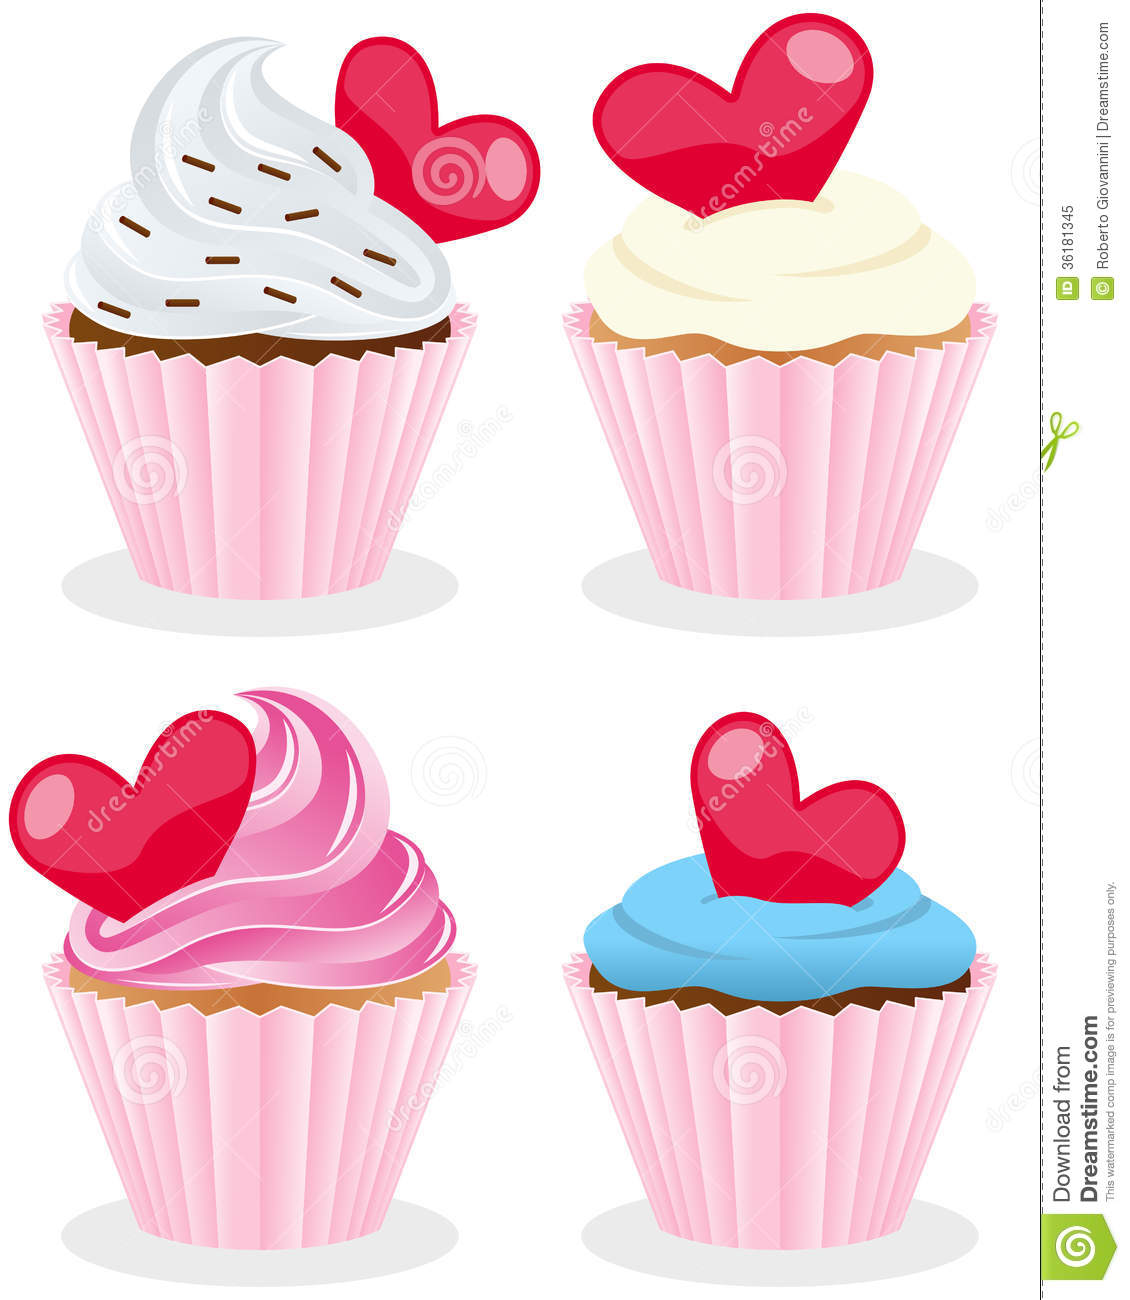 Valentines Day Cupcakes Clipart.